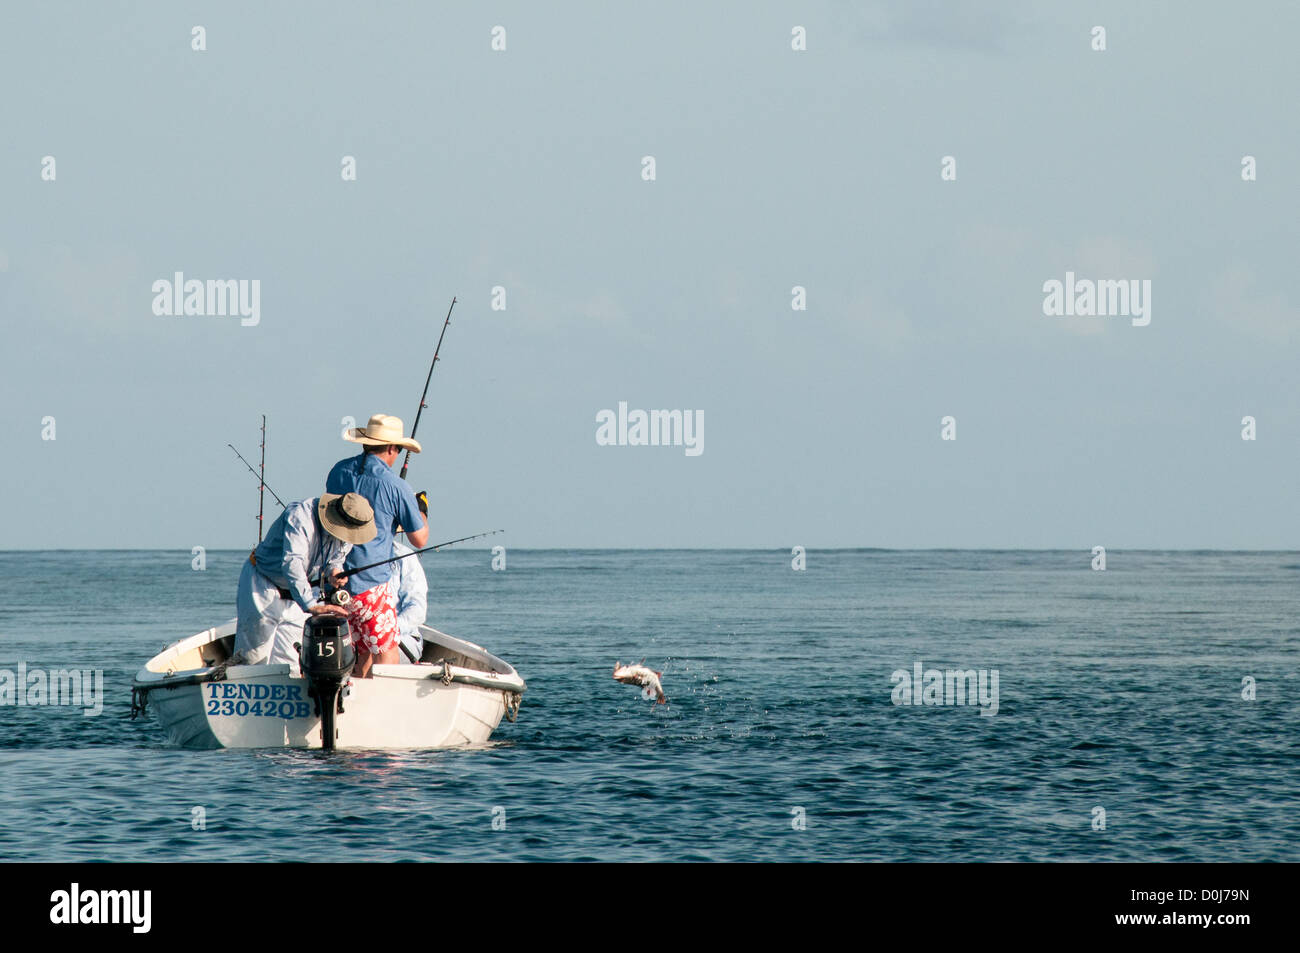 Three fishermen in a small dinghy catch a fish out on Swains Reef on the southern end of the Great Barrier Reef, off Queensland's central coast. Stock Photo